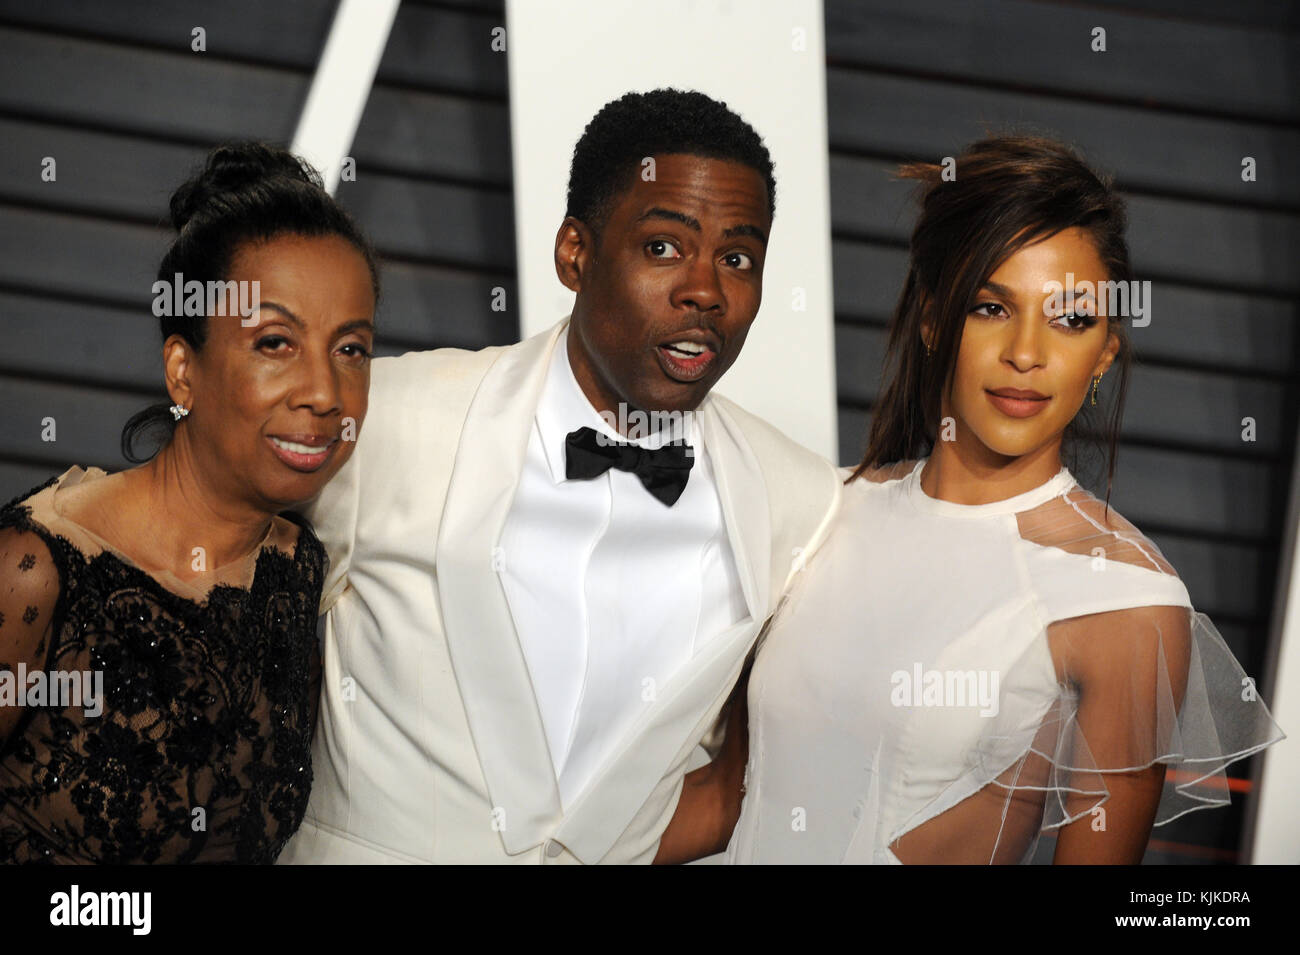 BEVERLY HILLS, CA - FEBRUARY 28: Rosalie Rock, Chris Rock,  Megalyn Echikunwoke attends the 2016 Vanity Fair Oscar Party Hosted By Graydon Carter at the Wallis Annenberg Center for the Performing Arts on February 28, 2016 in Beverly Hills, California.  People:  Rosalie Rock, Chris Rock,  Megalyn Echikunwoke Stock Photo